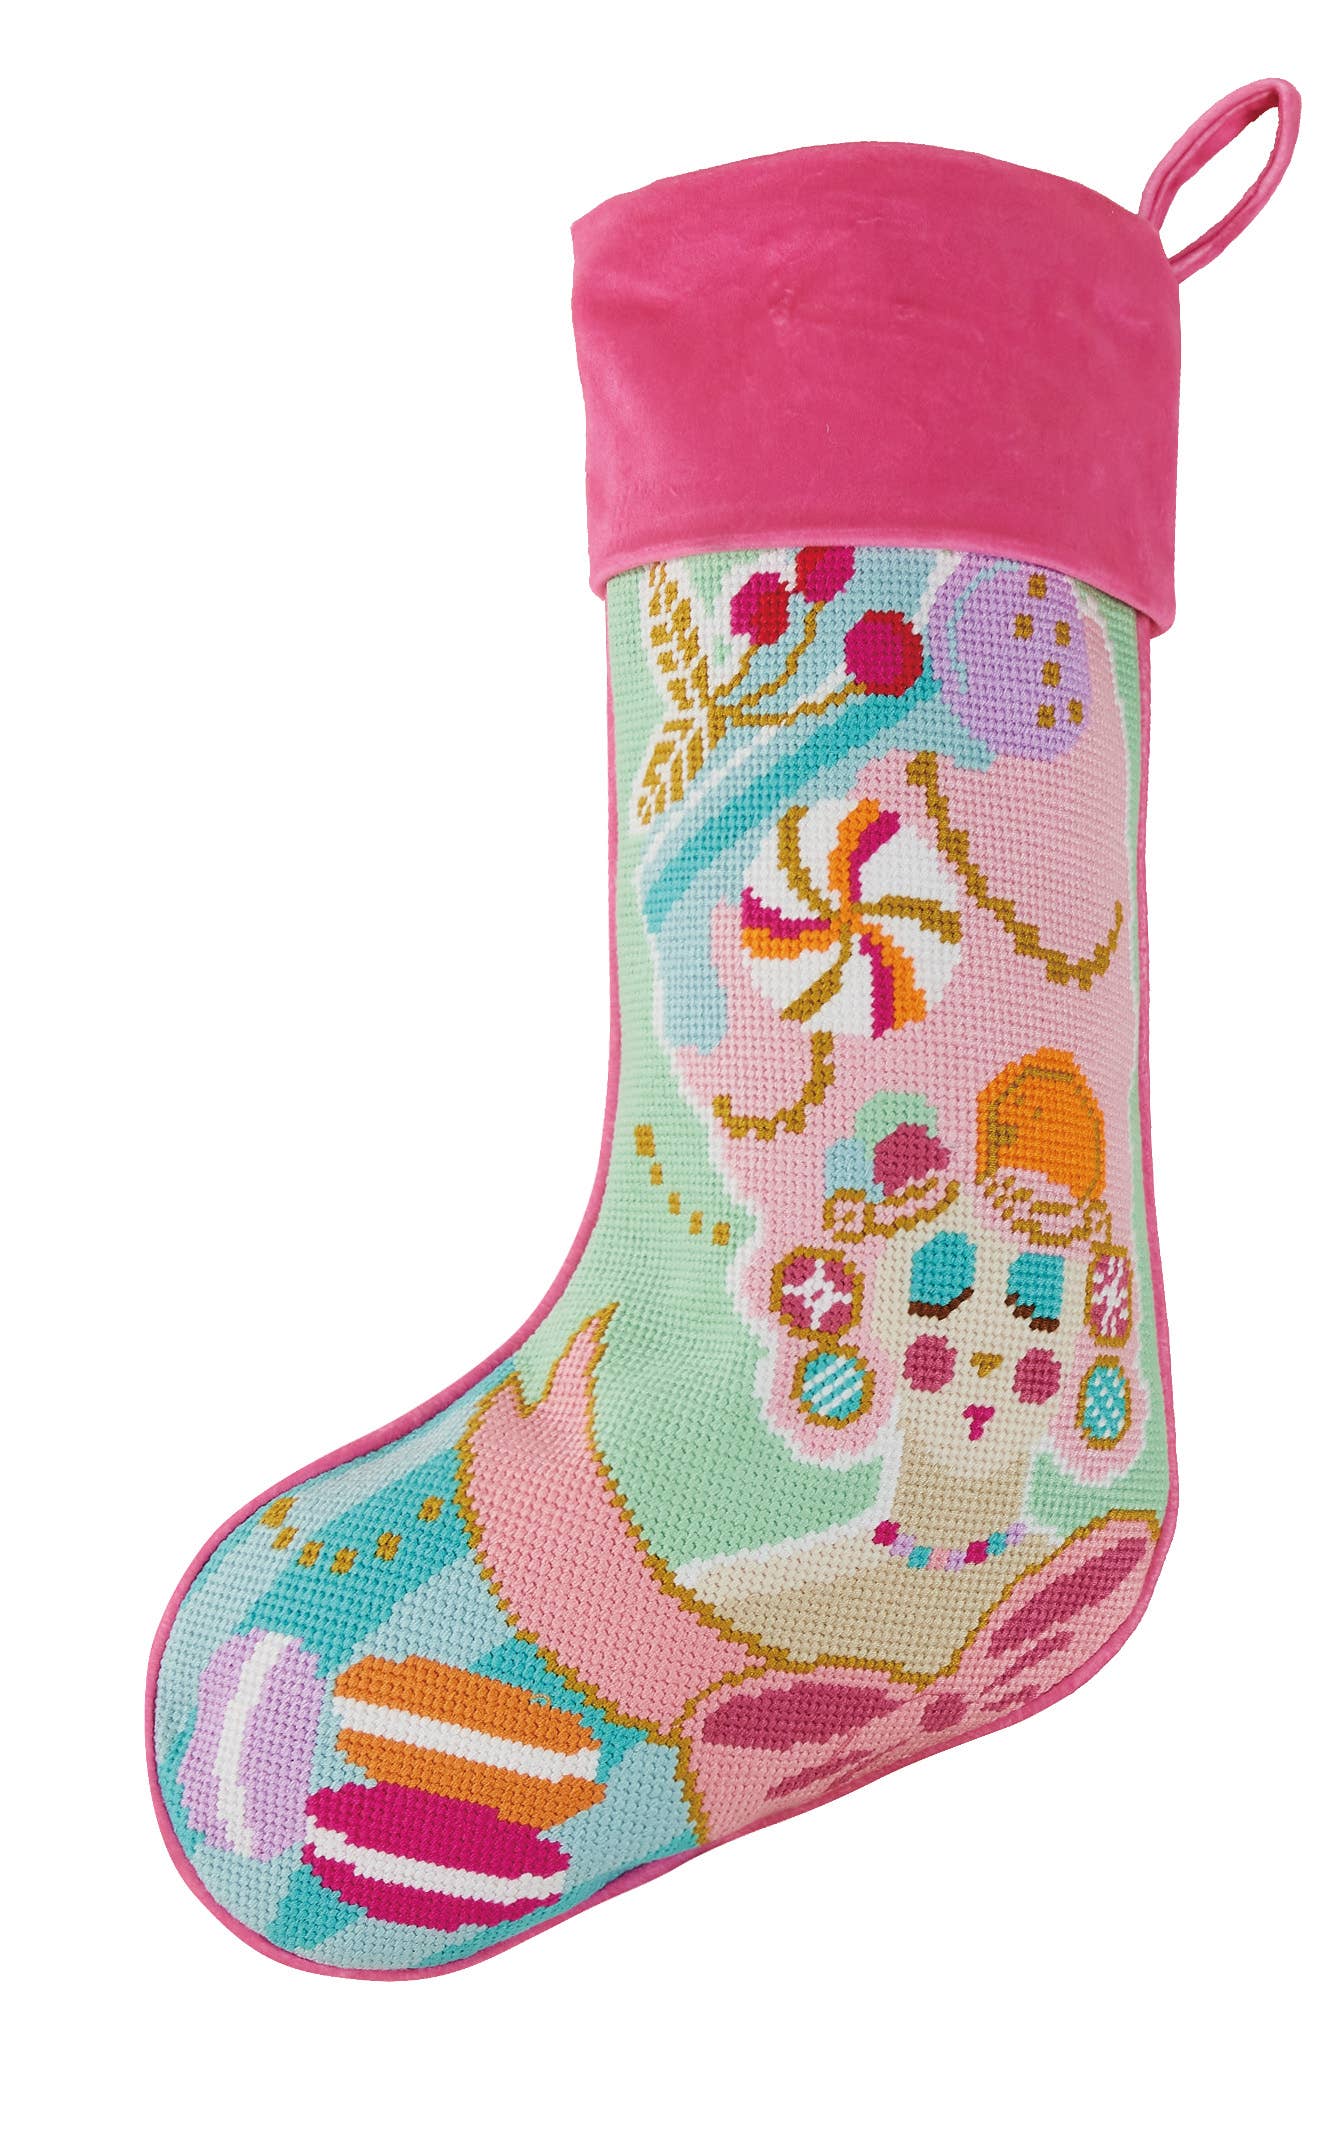 Marie Sweet Embroidered Needlepoint Stocking